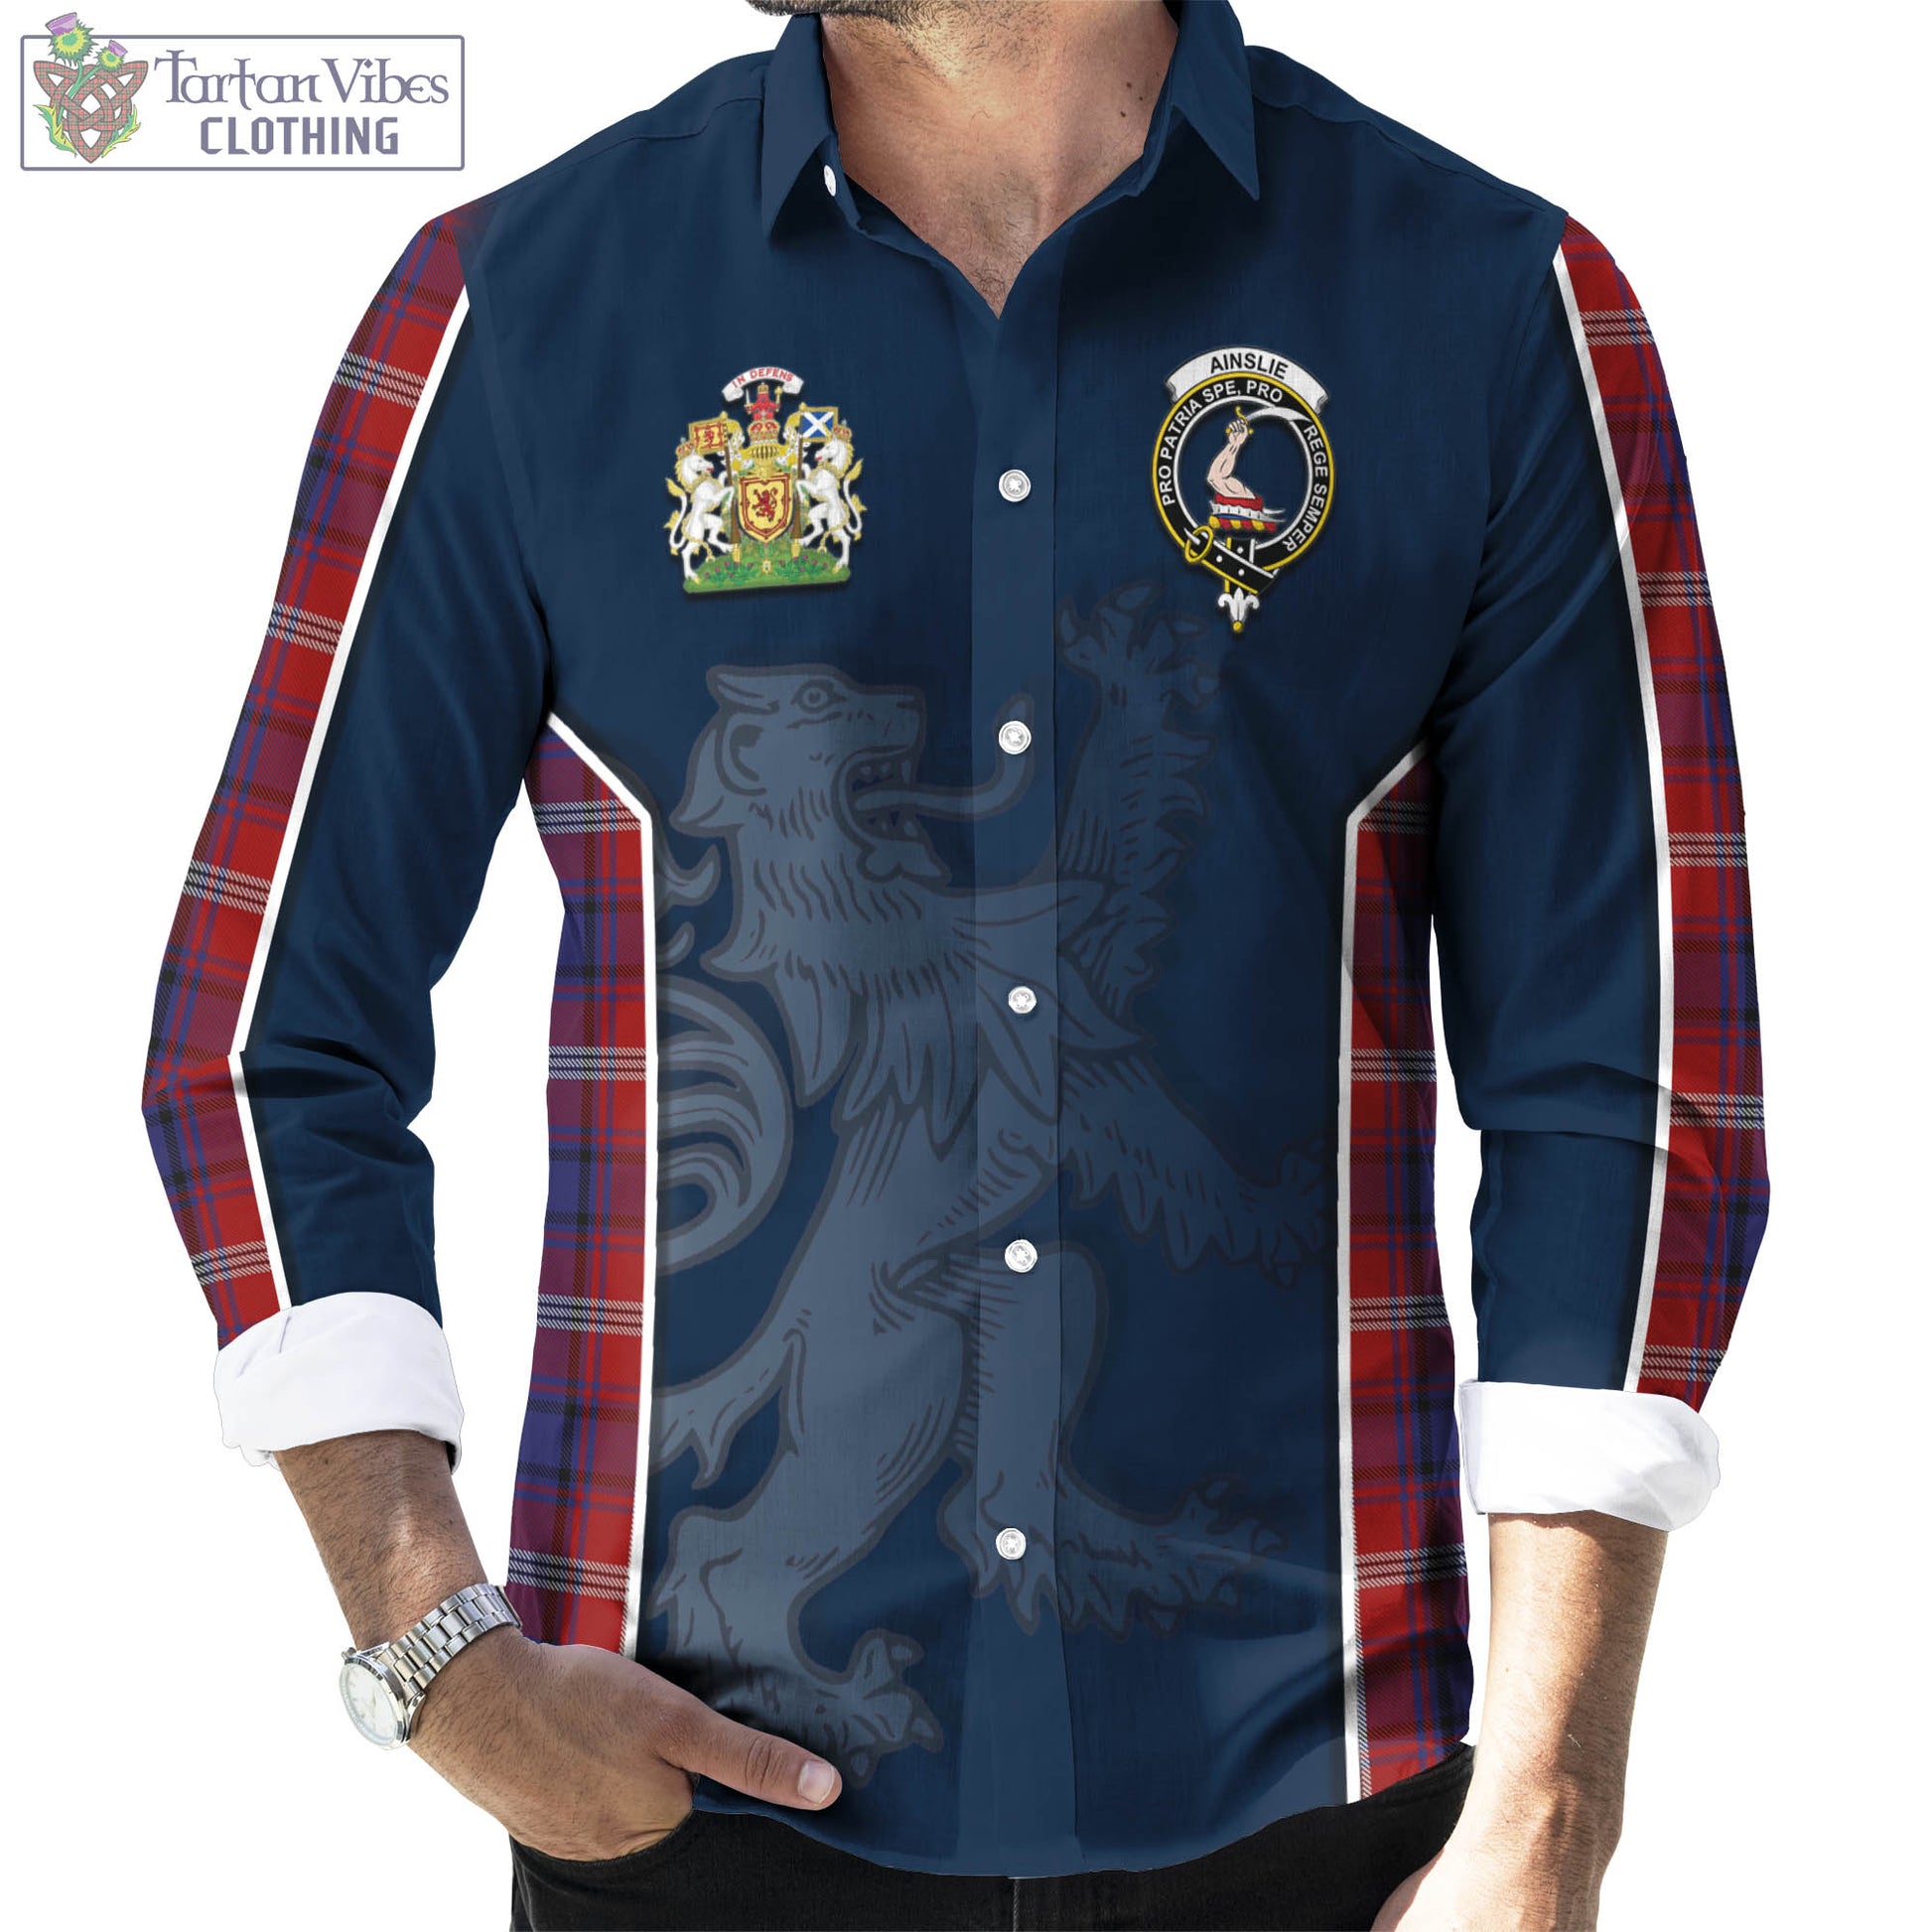 Tartan Vibes Clothing Ainslie Tartan Long Sleeve Button Up Shirt with Family Crest and Lion Rampant Vibes Sport Style